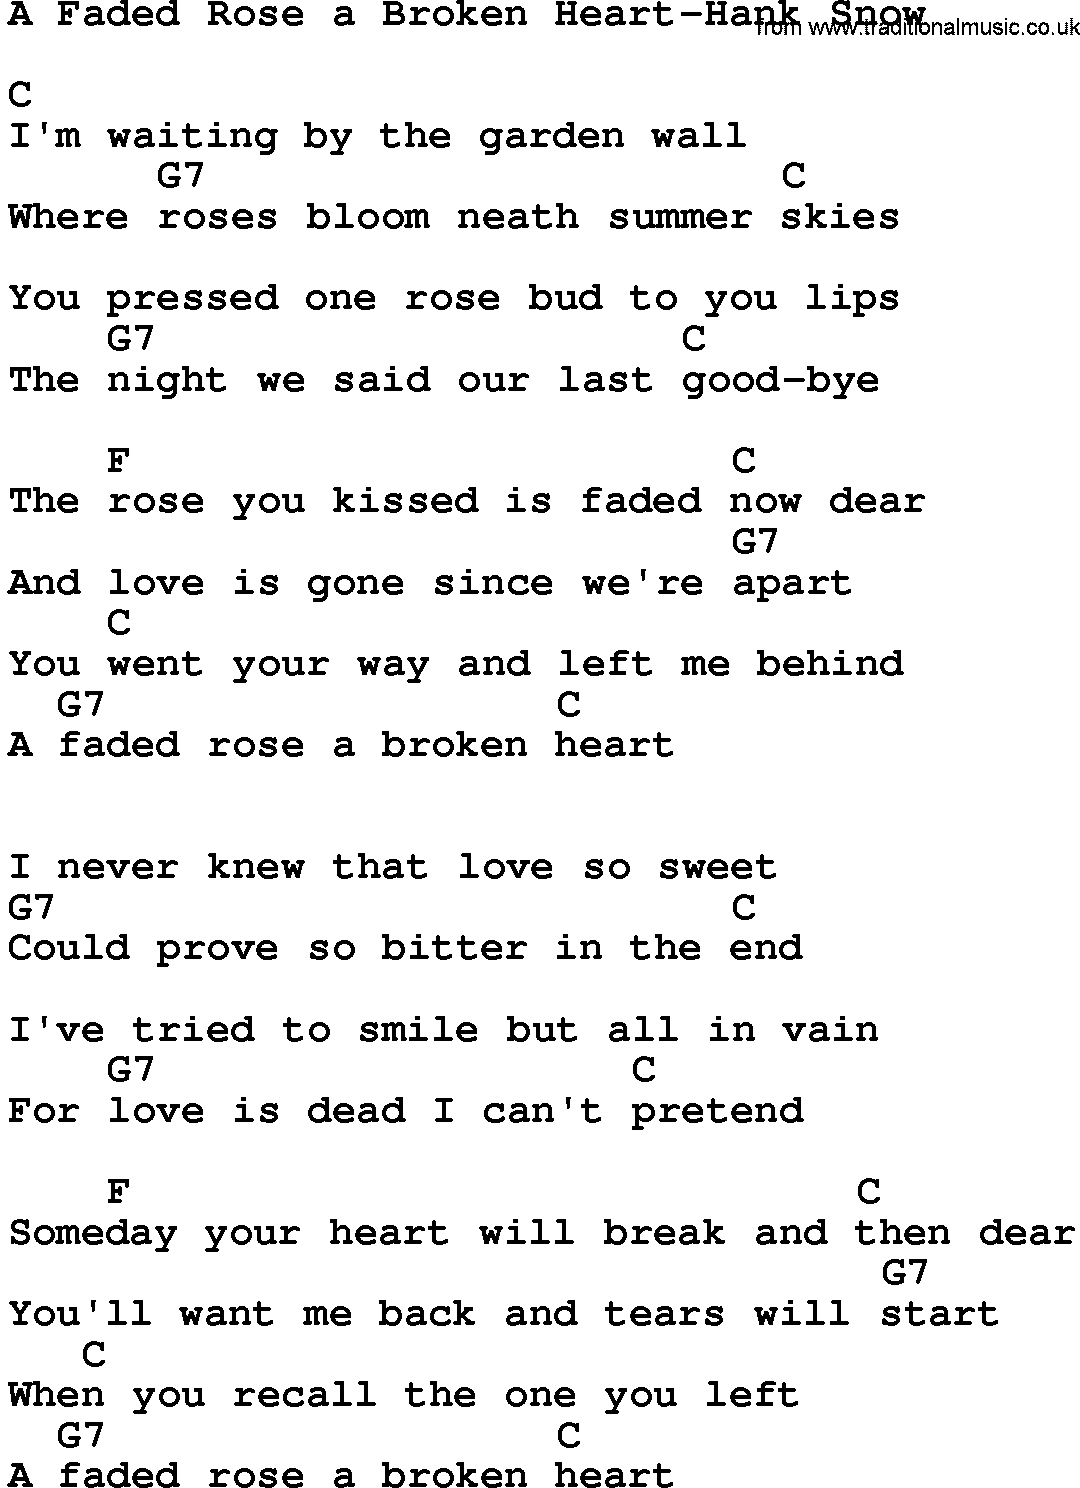 Country music song: A Faded Rose A Broken Heart-Hank Snow lyrics and chords